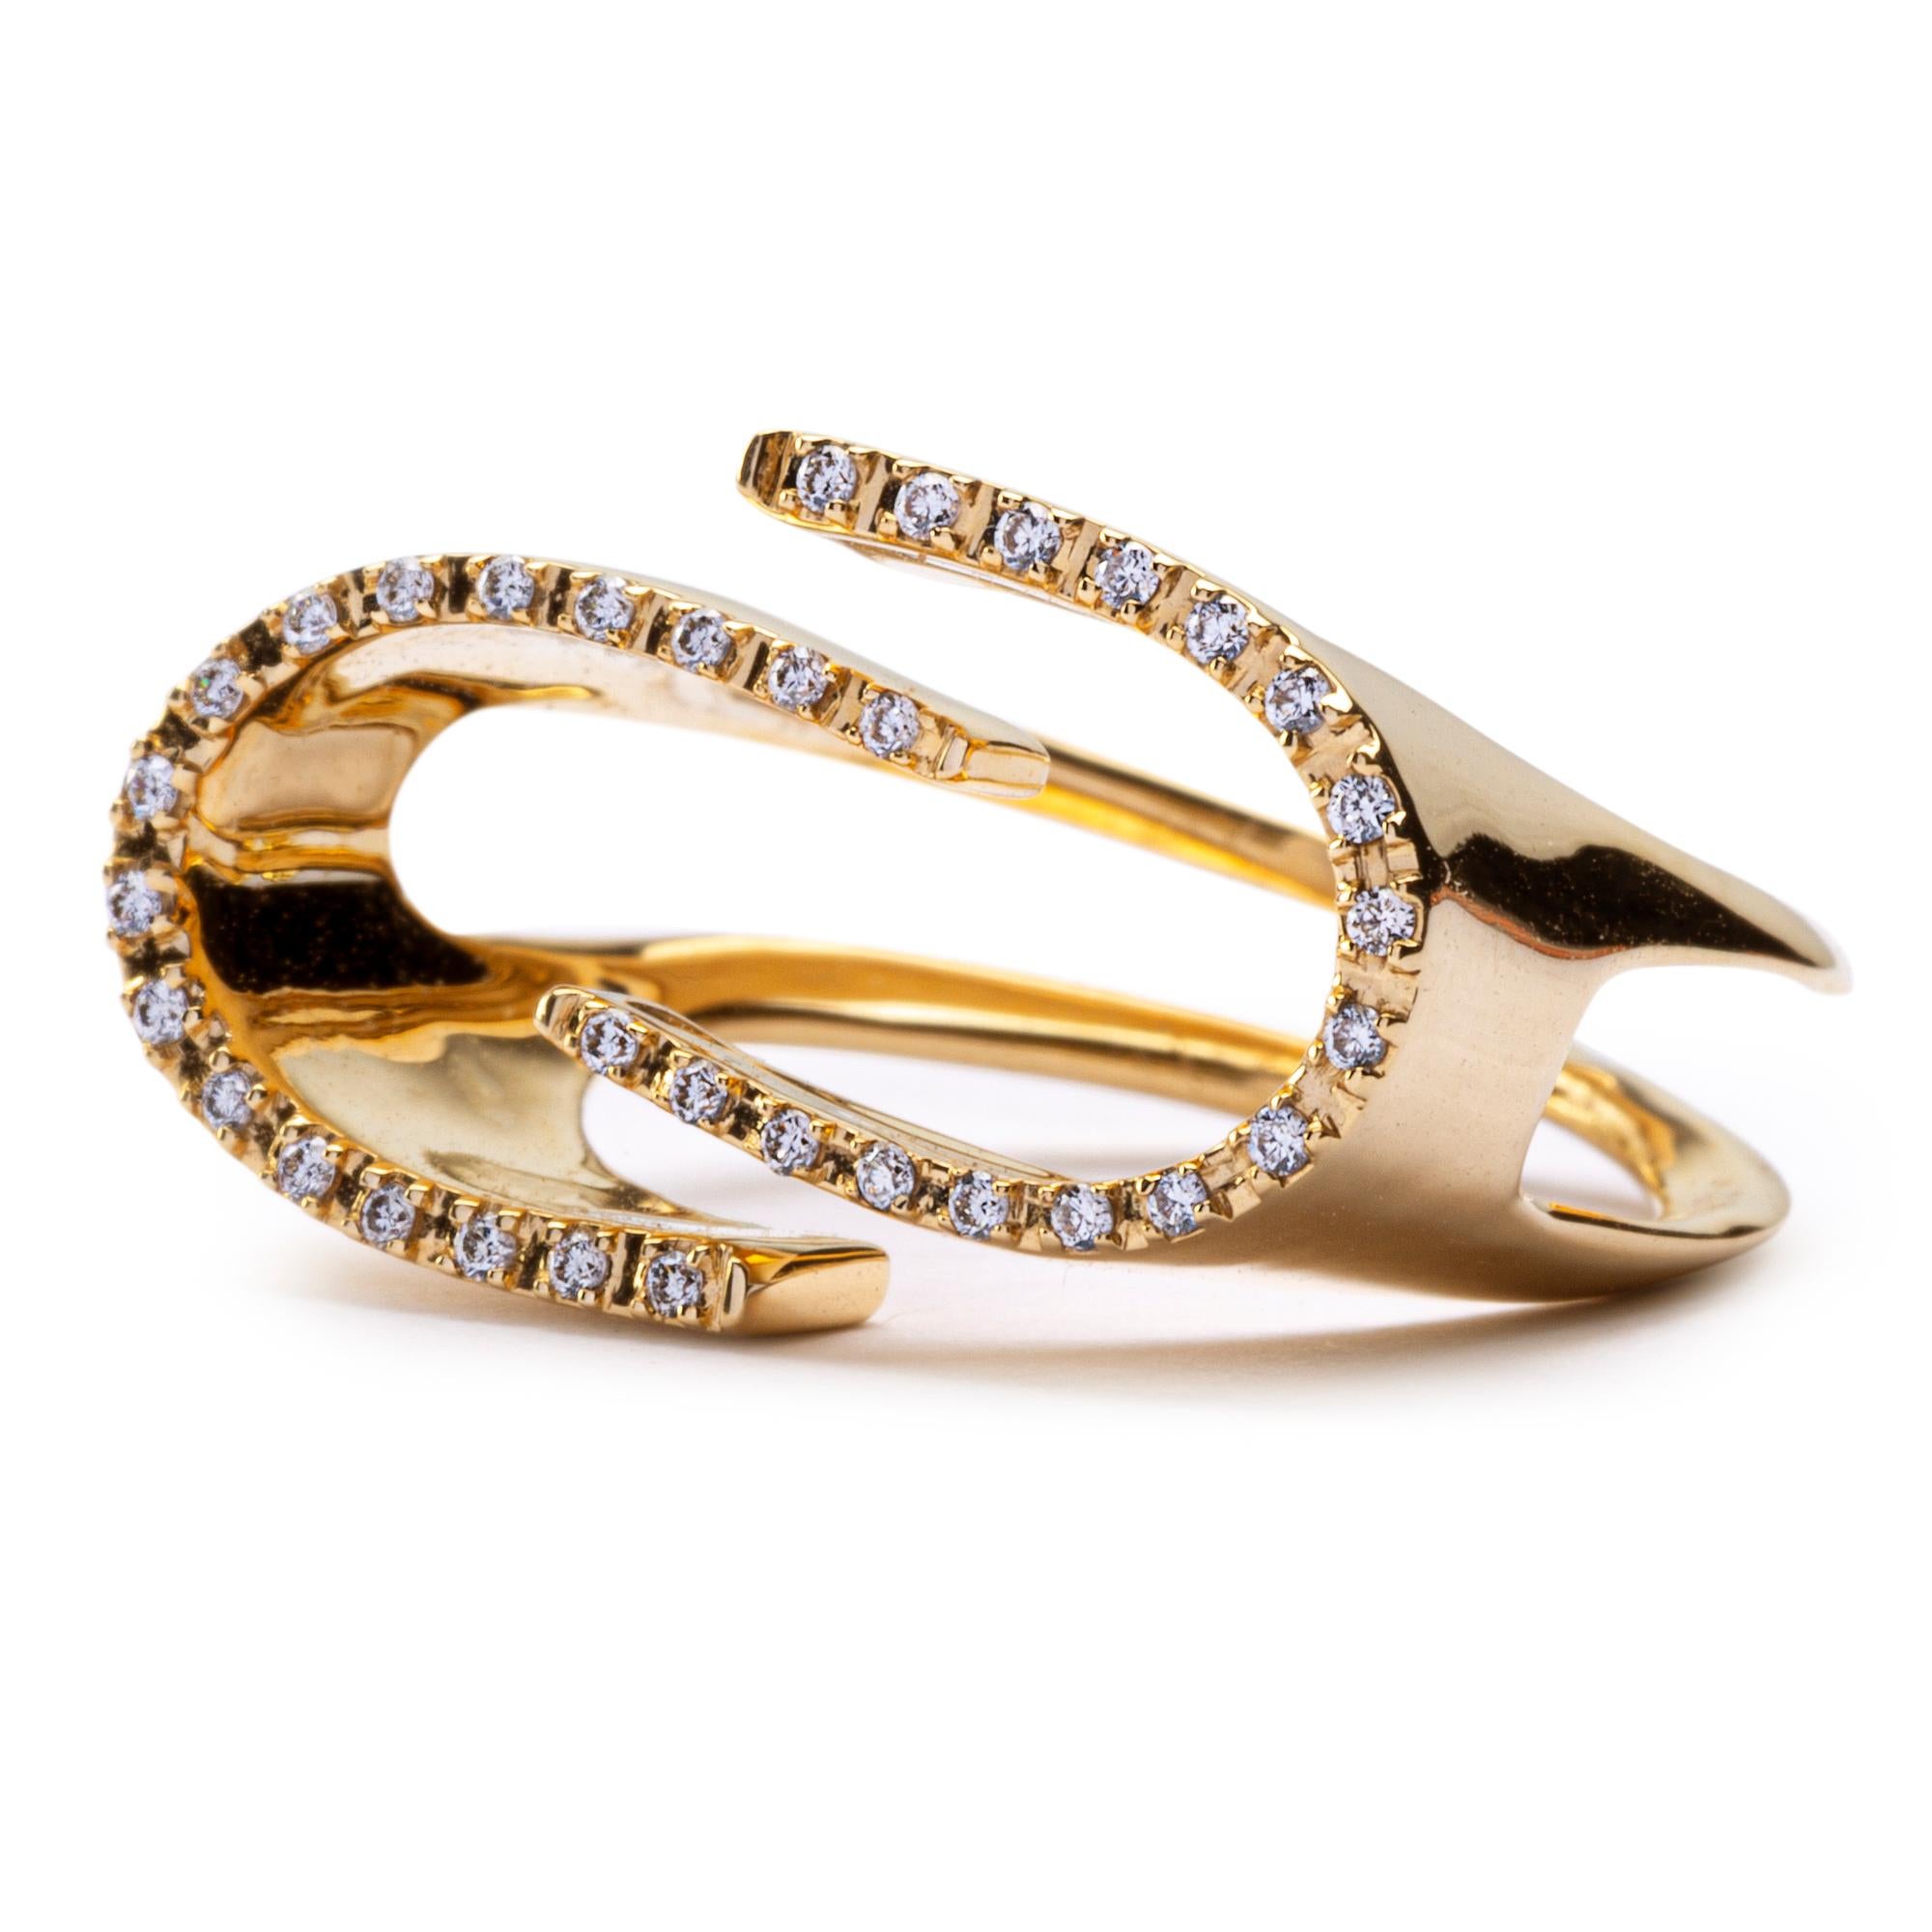 Jona design collection, hand crafted in Italy, 18 Karat yellow gold ring, set with 0.18 carats of white diamonds.  US size 6, can be sized to any specification.
All Jona jewelry is new and has never been previously owned or worn. Each item will